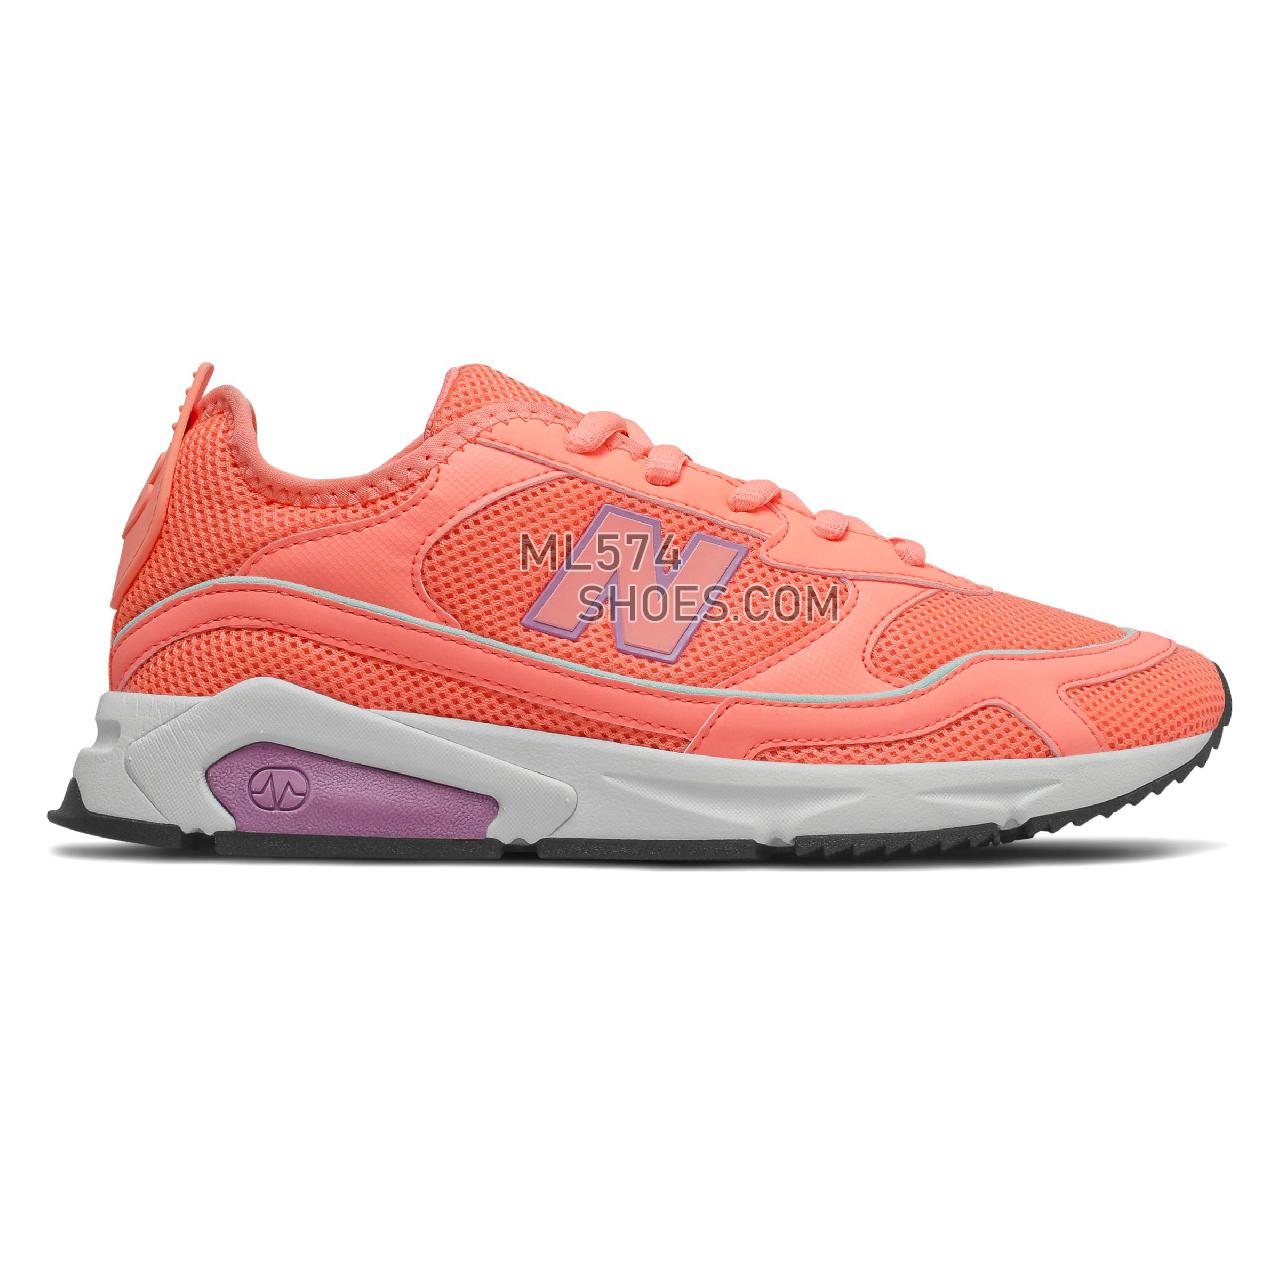 New Balance X-Racer - Women's Sport Style Sneakers - Ginger Pink with Canyon Violet - WSXRCNTA